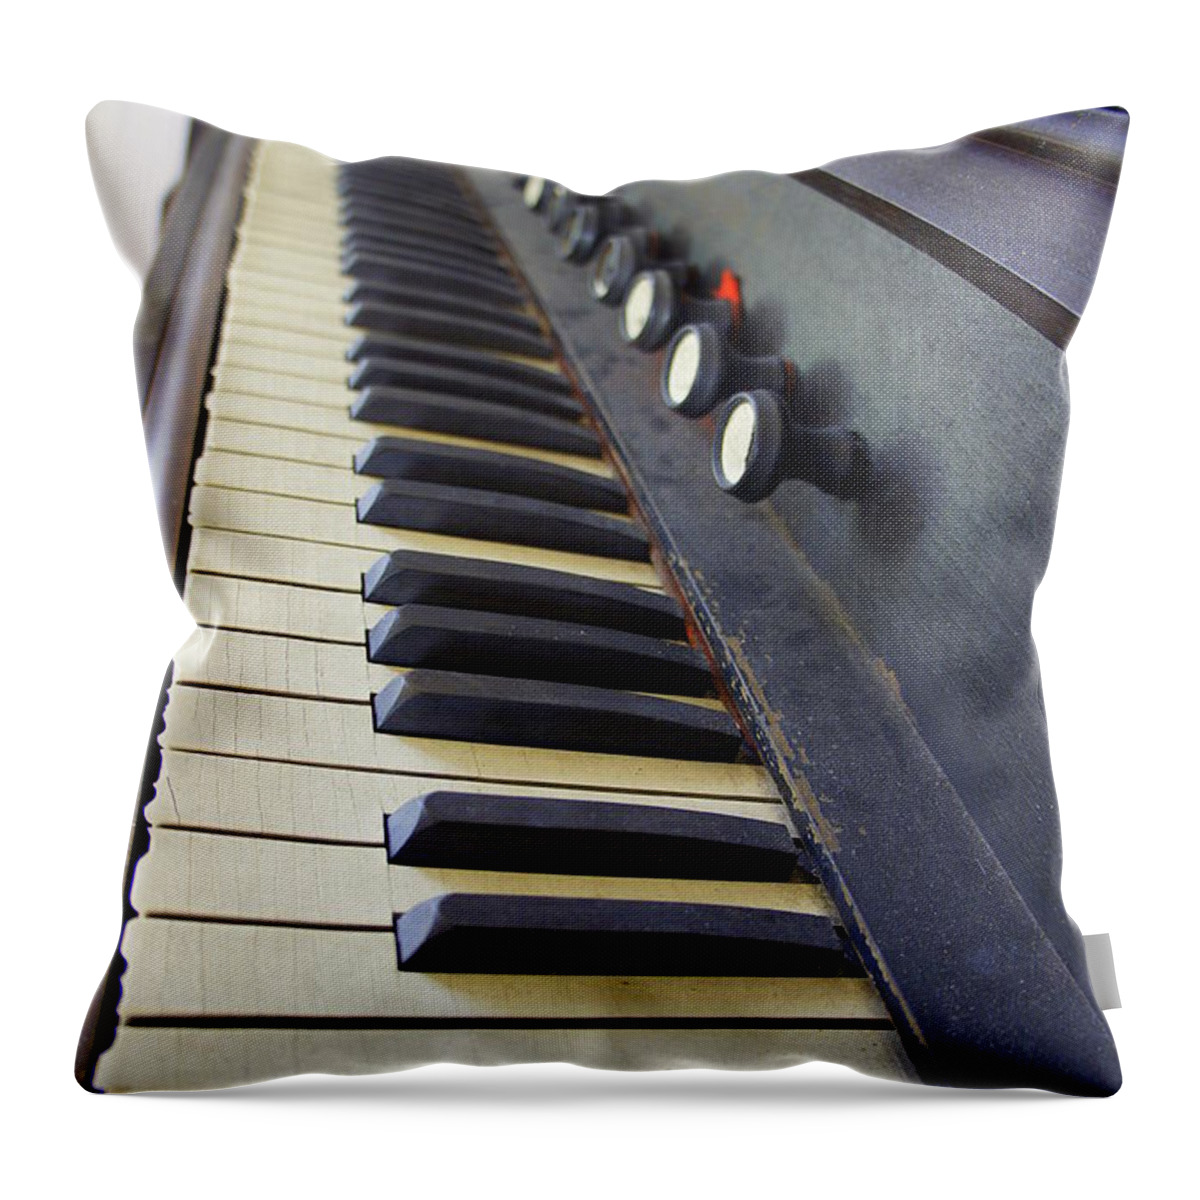 Organ Throw Pillow featuring the photograph Old Organ Keyboard by Laurie Perry